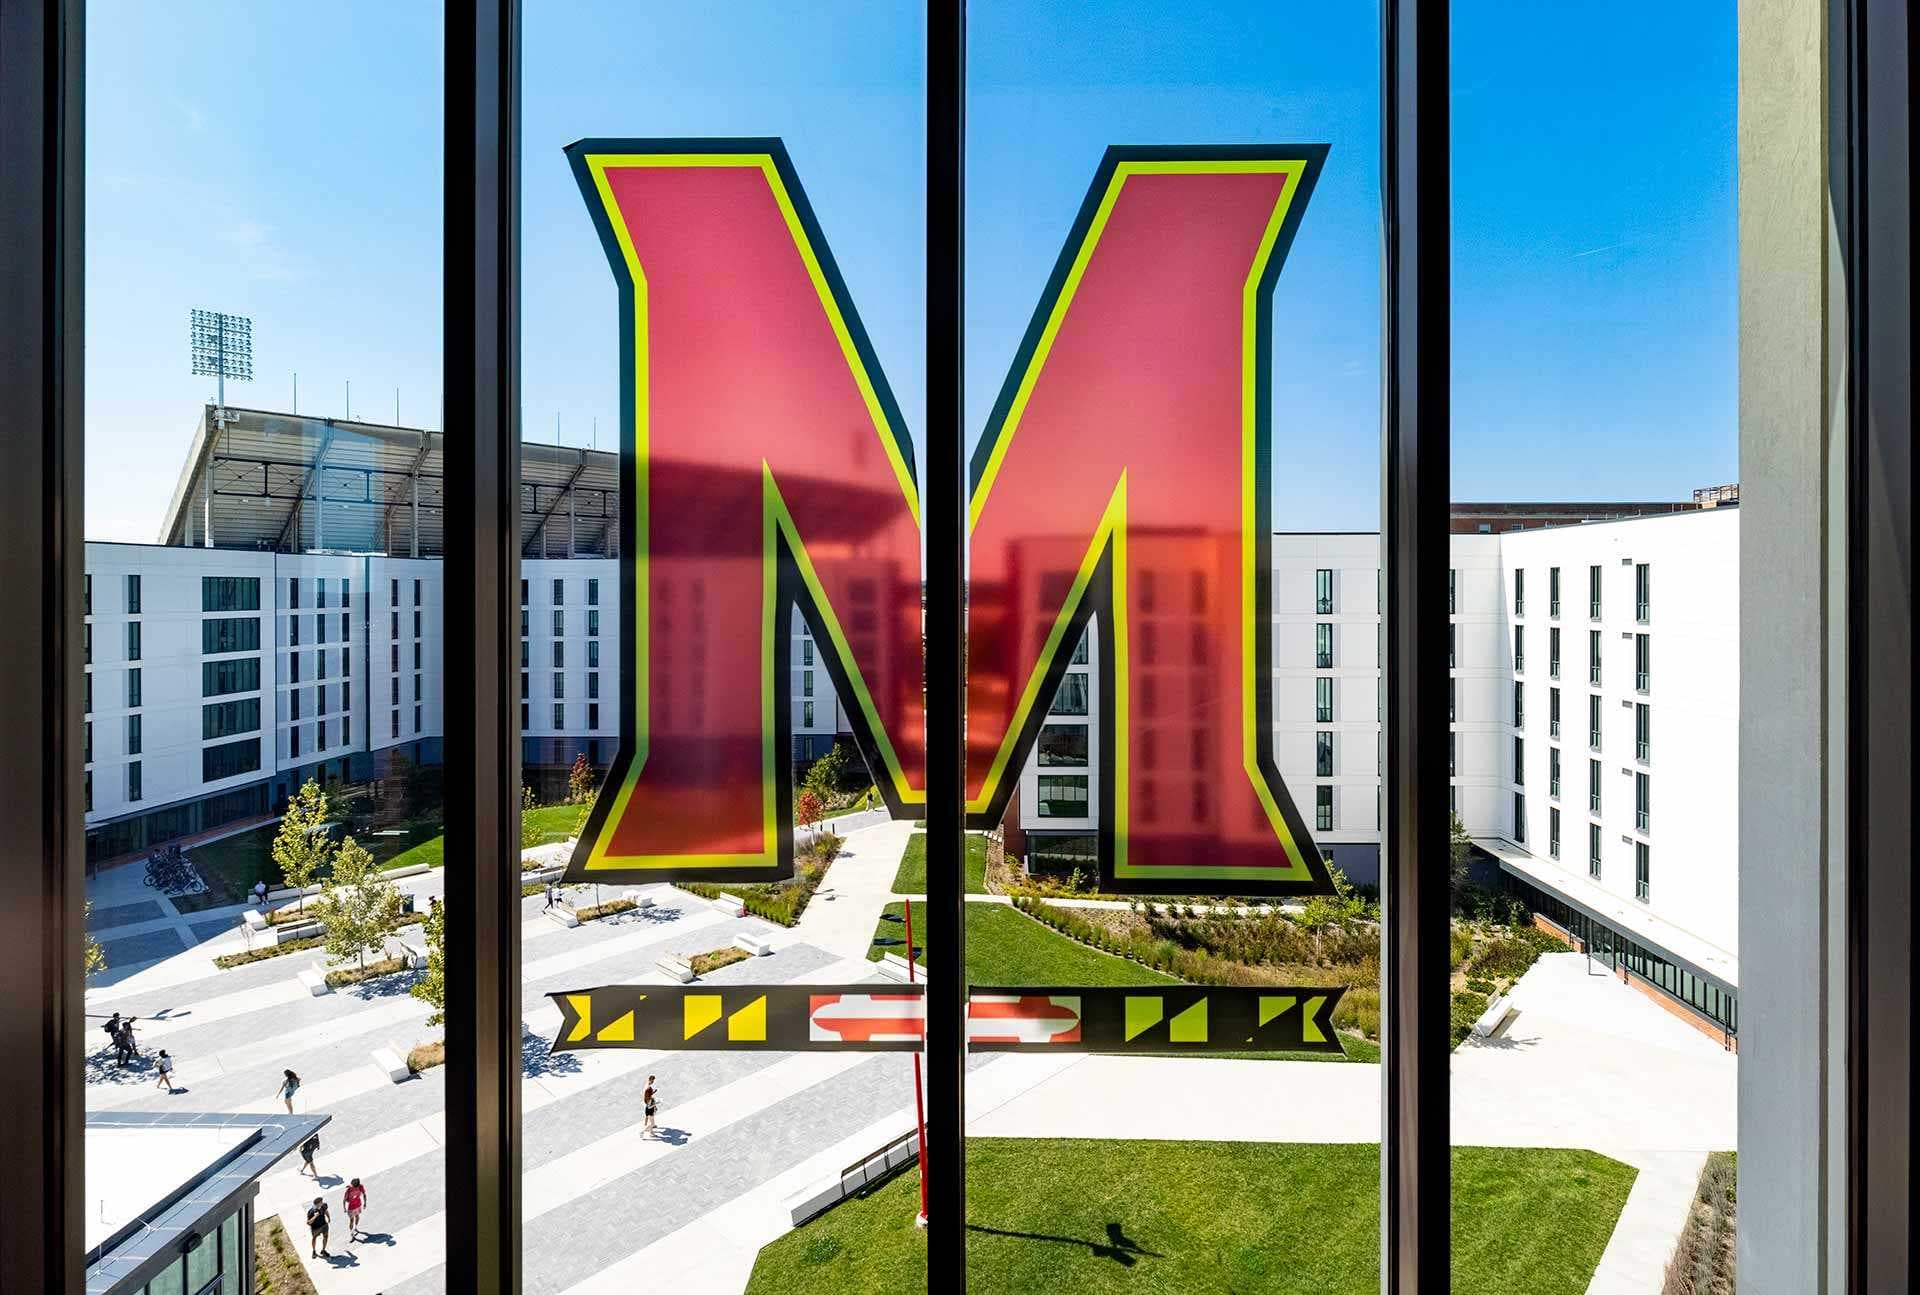 Maryland "M" over the new Heritage Community